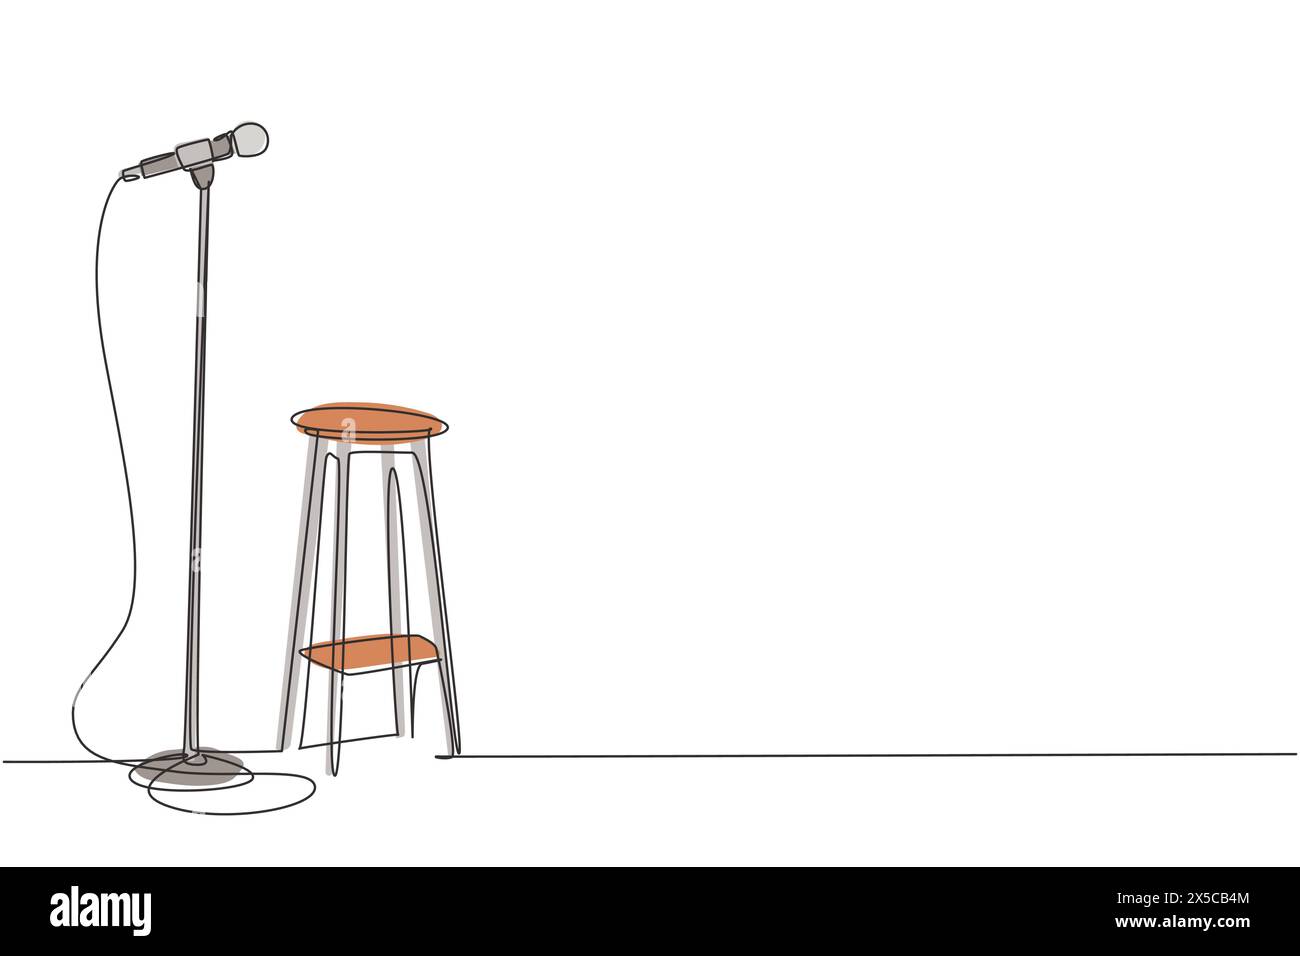 Single continuous line drawing microphone and stool on stand up comedy stage. Equipment at night club or bar for stand up comedian performance. Dynami Stock Vector